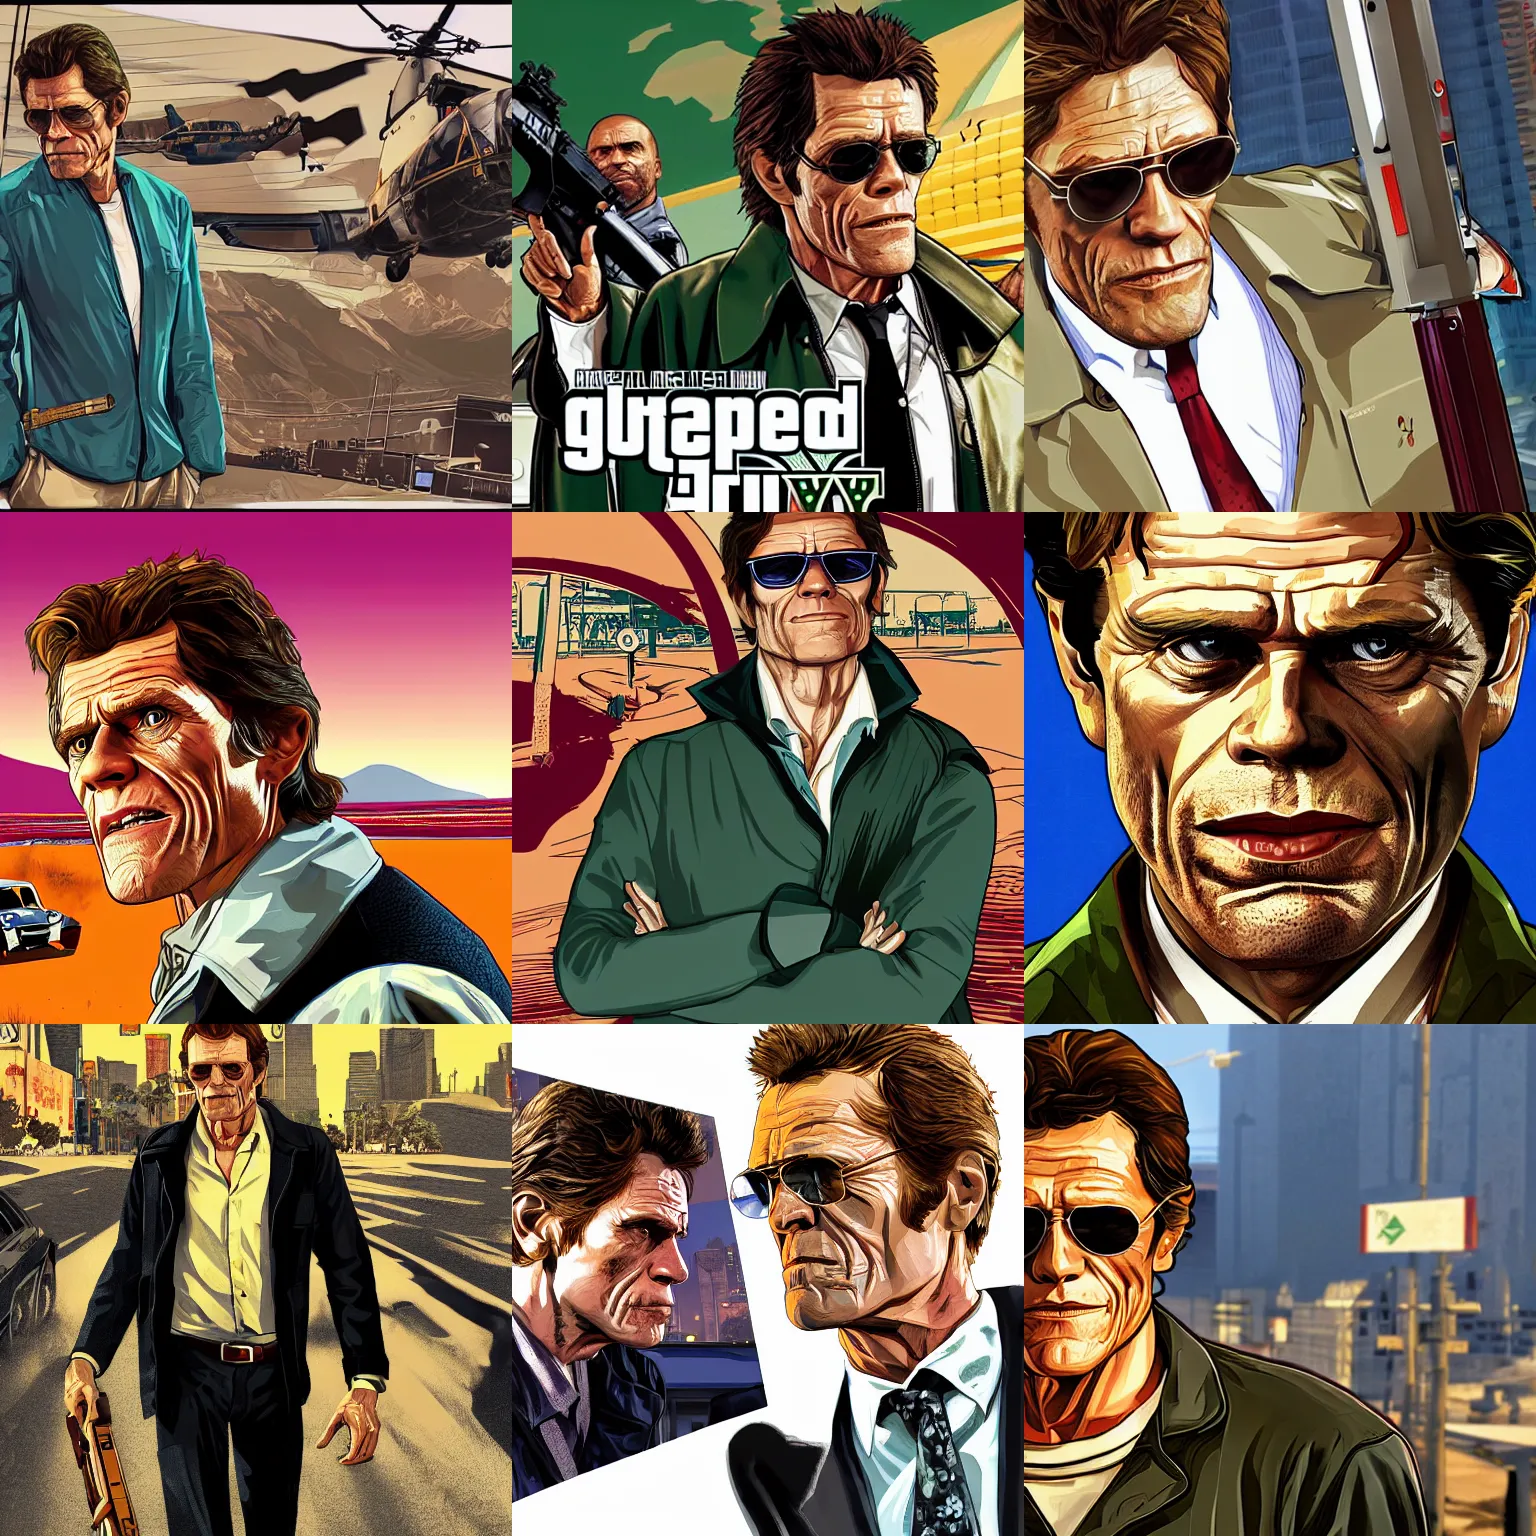 Prompt: willem dafoe in gta v promotional art by stephen bliss, no text, very detailed, professional quality